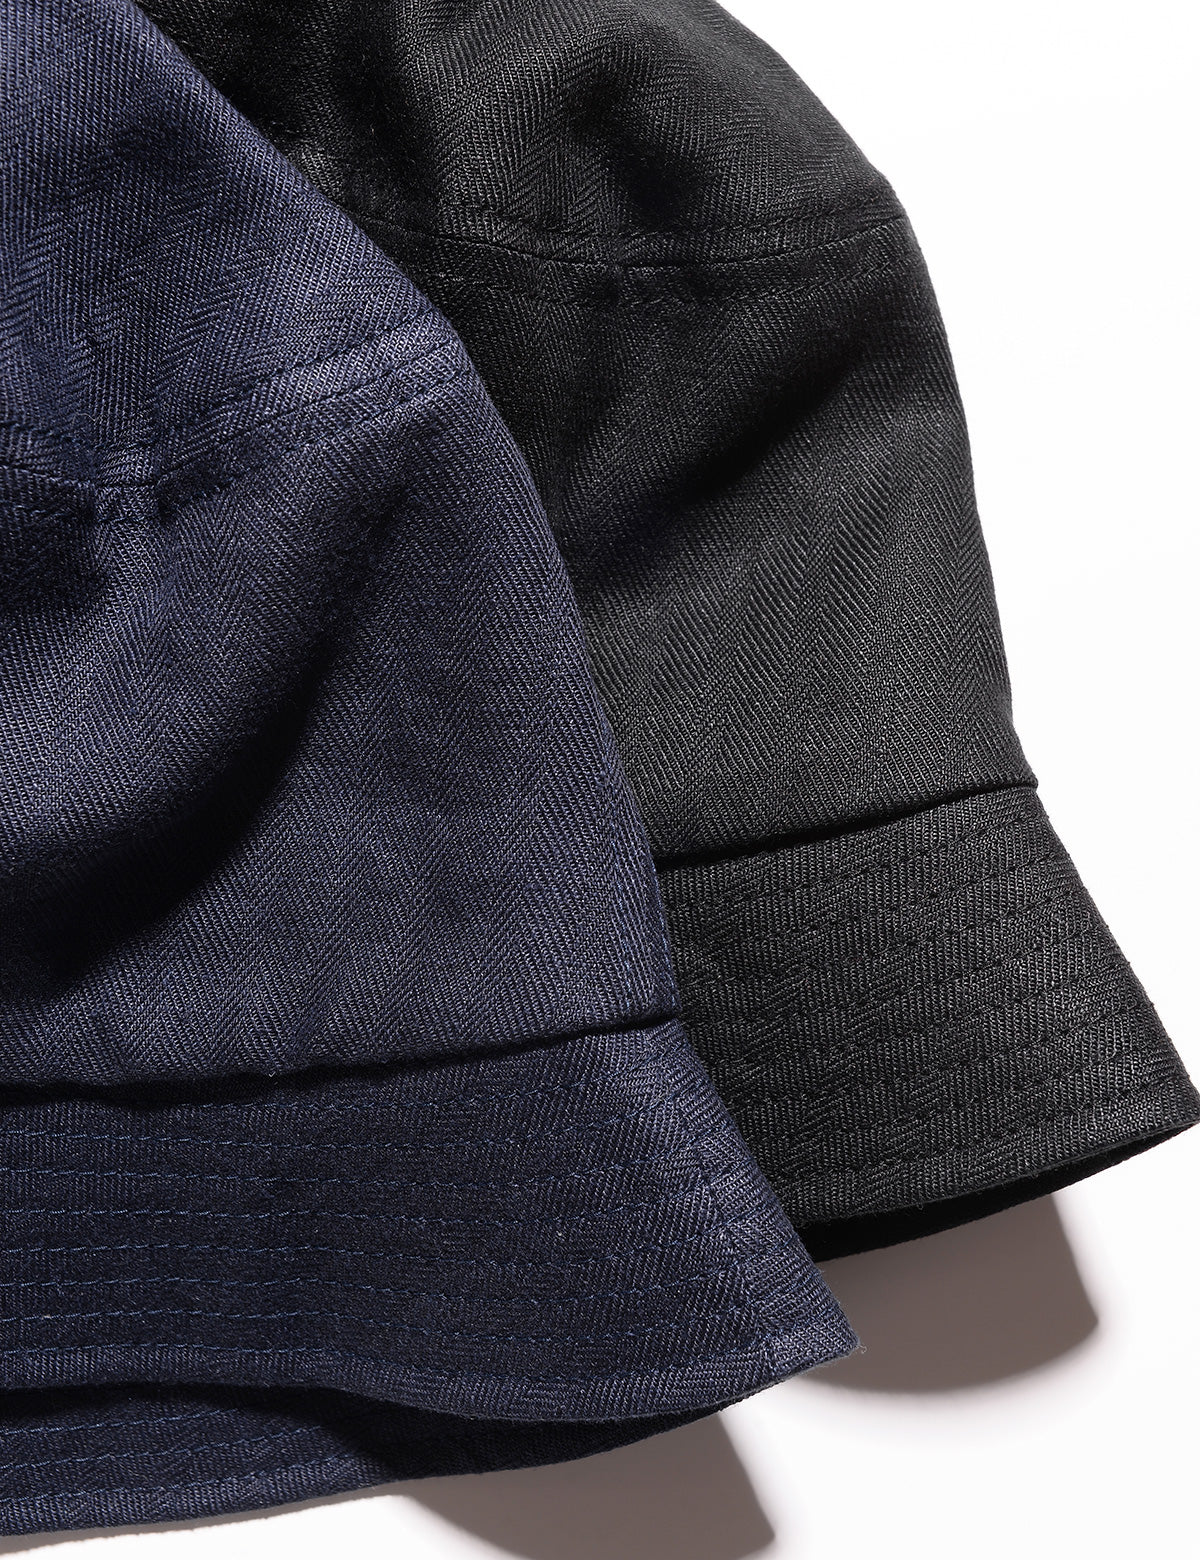 Detail of two Cableami French Linen Bucket Hats showing fabric weave